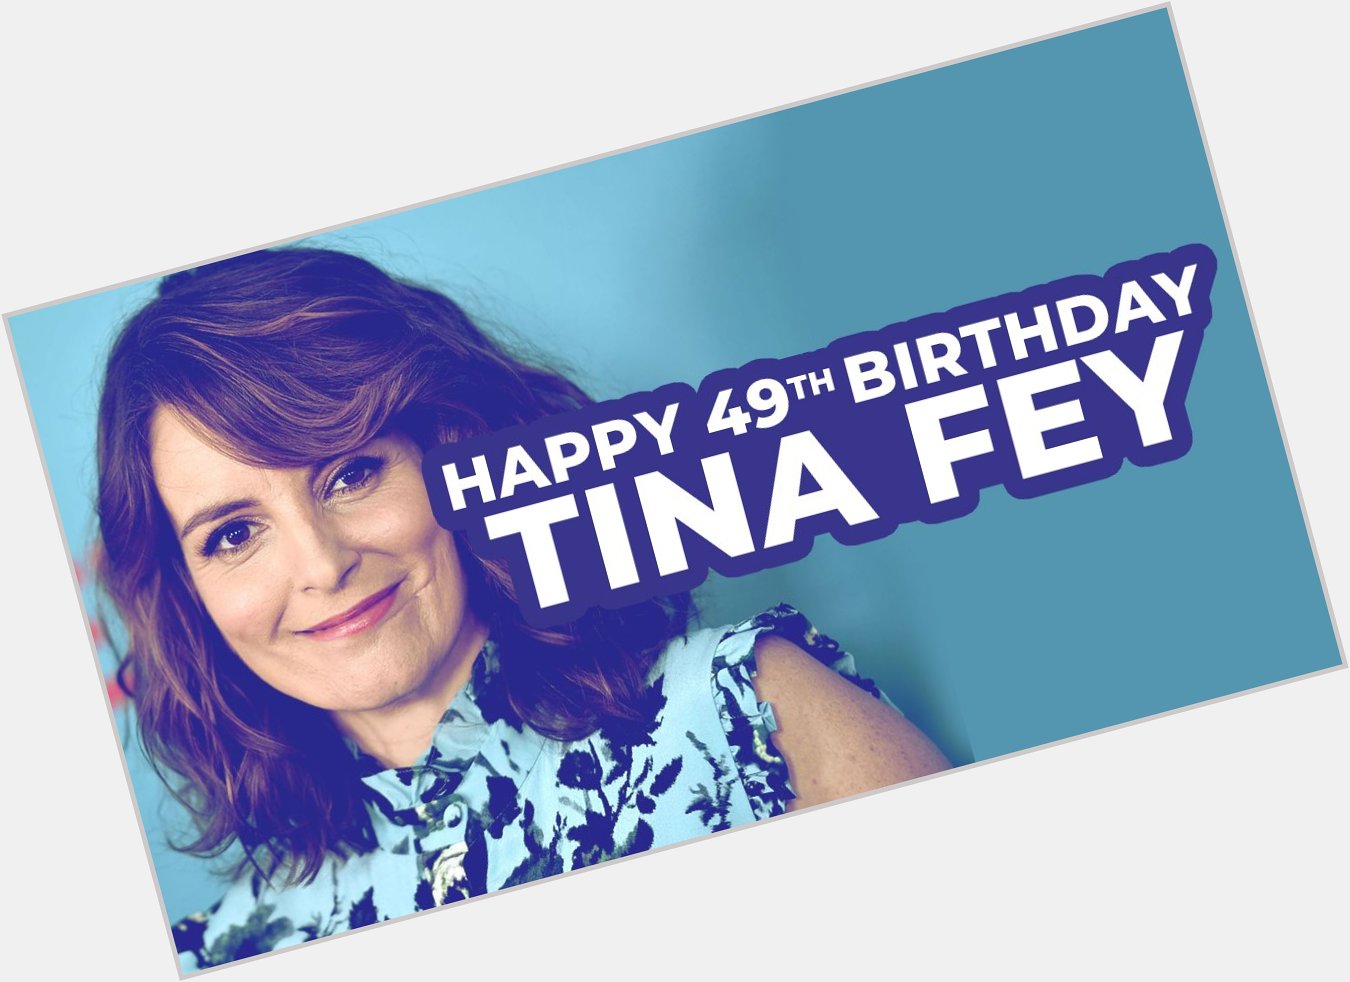 Happy 49th Birthday to our queen, Tina Fey! 